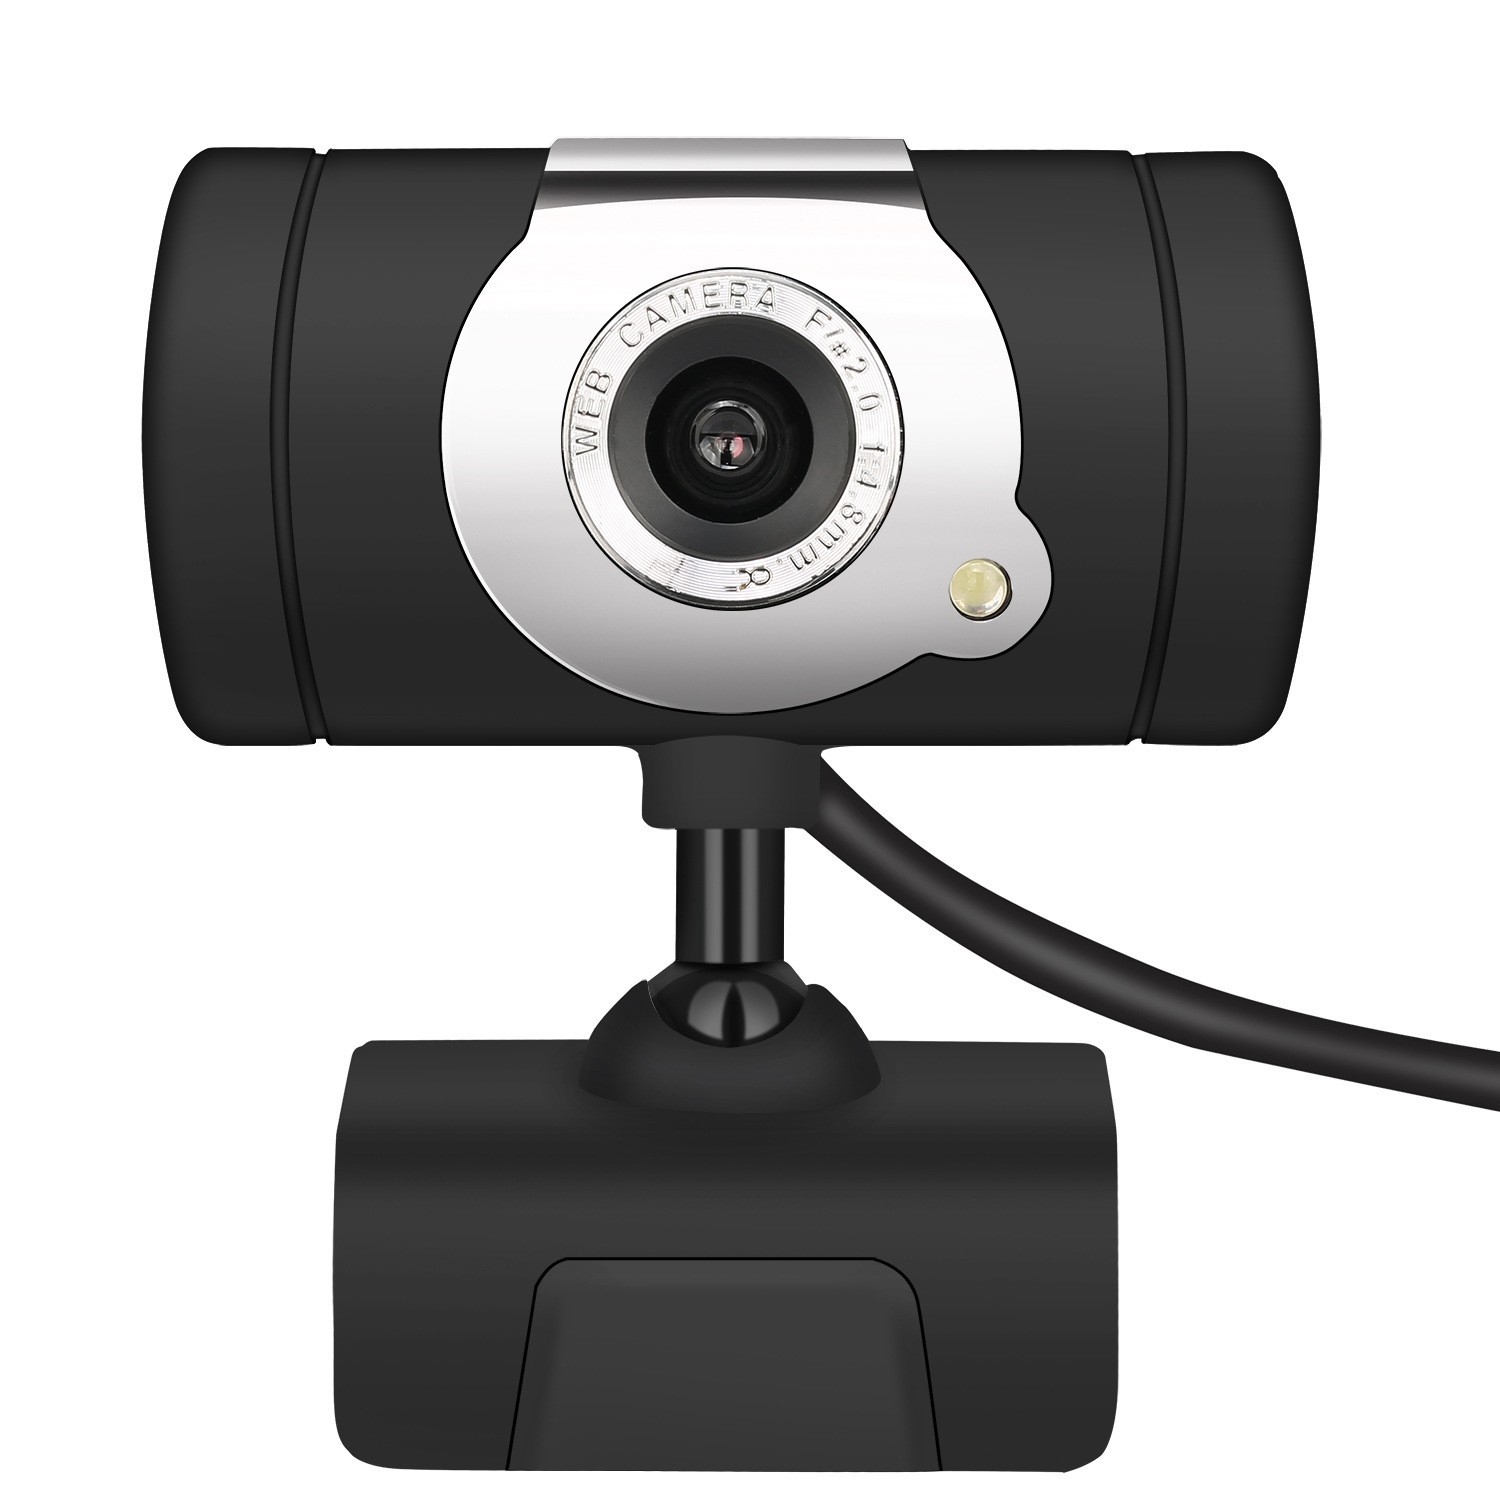 [On Sale] A847 USB 2.0 HD PC Webcam 12MP 480P Computer Web Camera for Video Calling Recording Conferencing Live Streaming